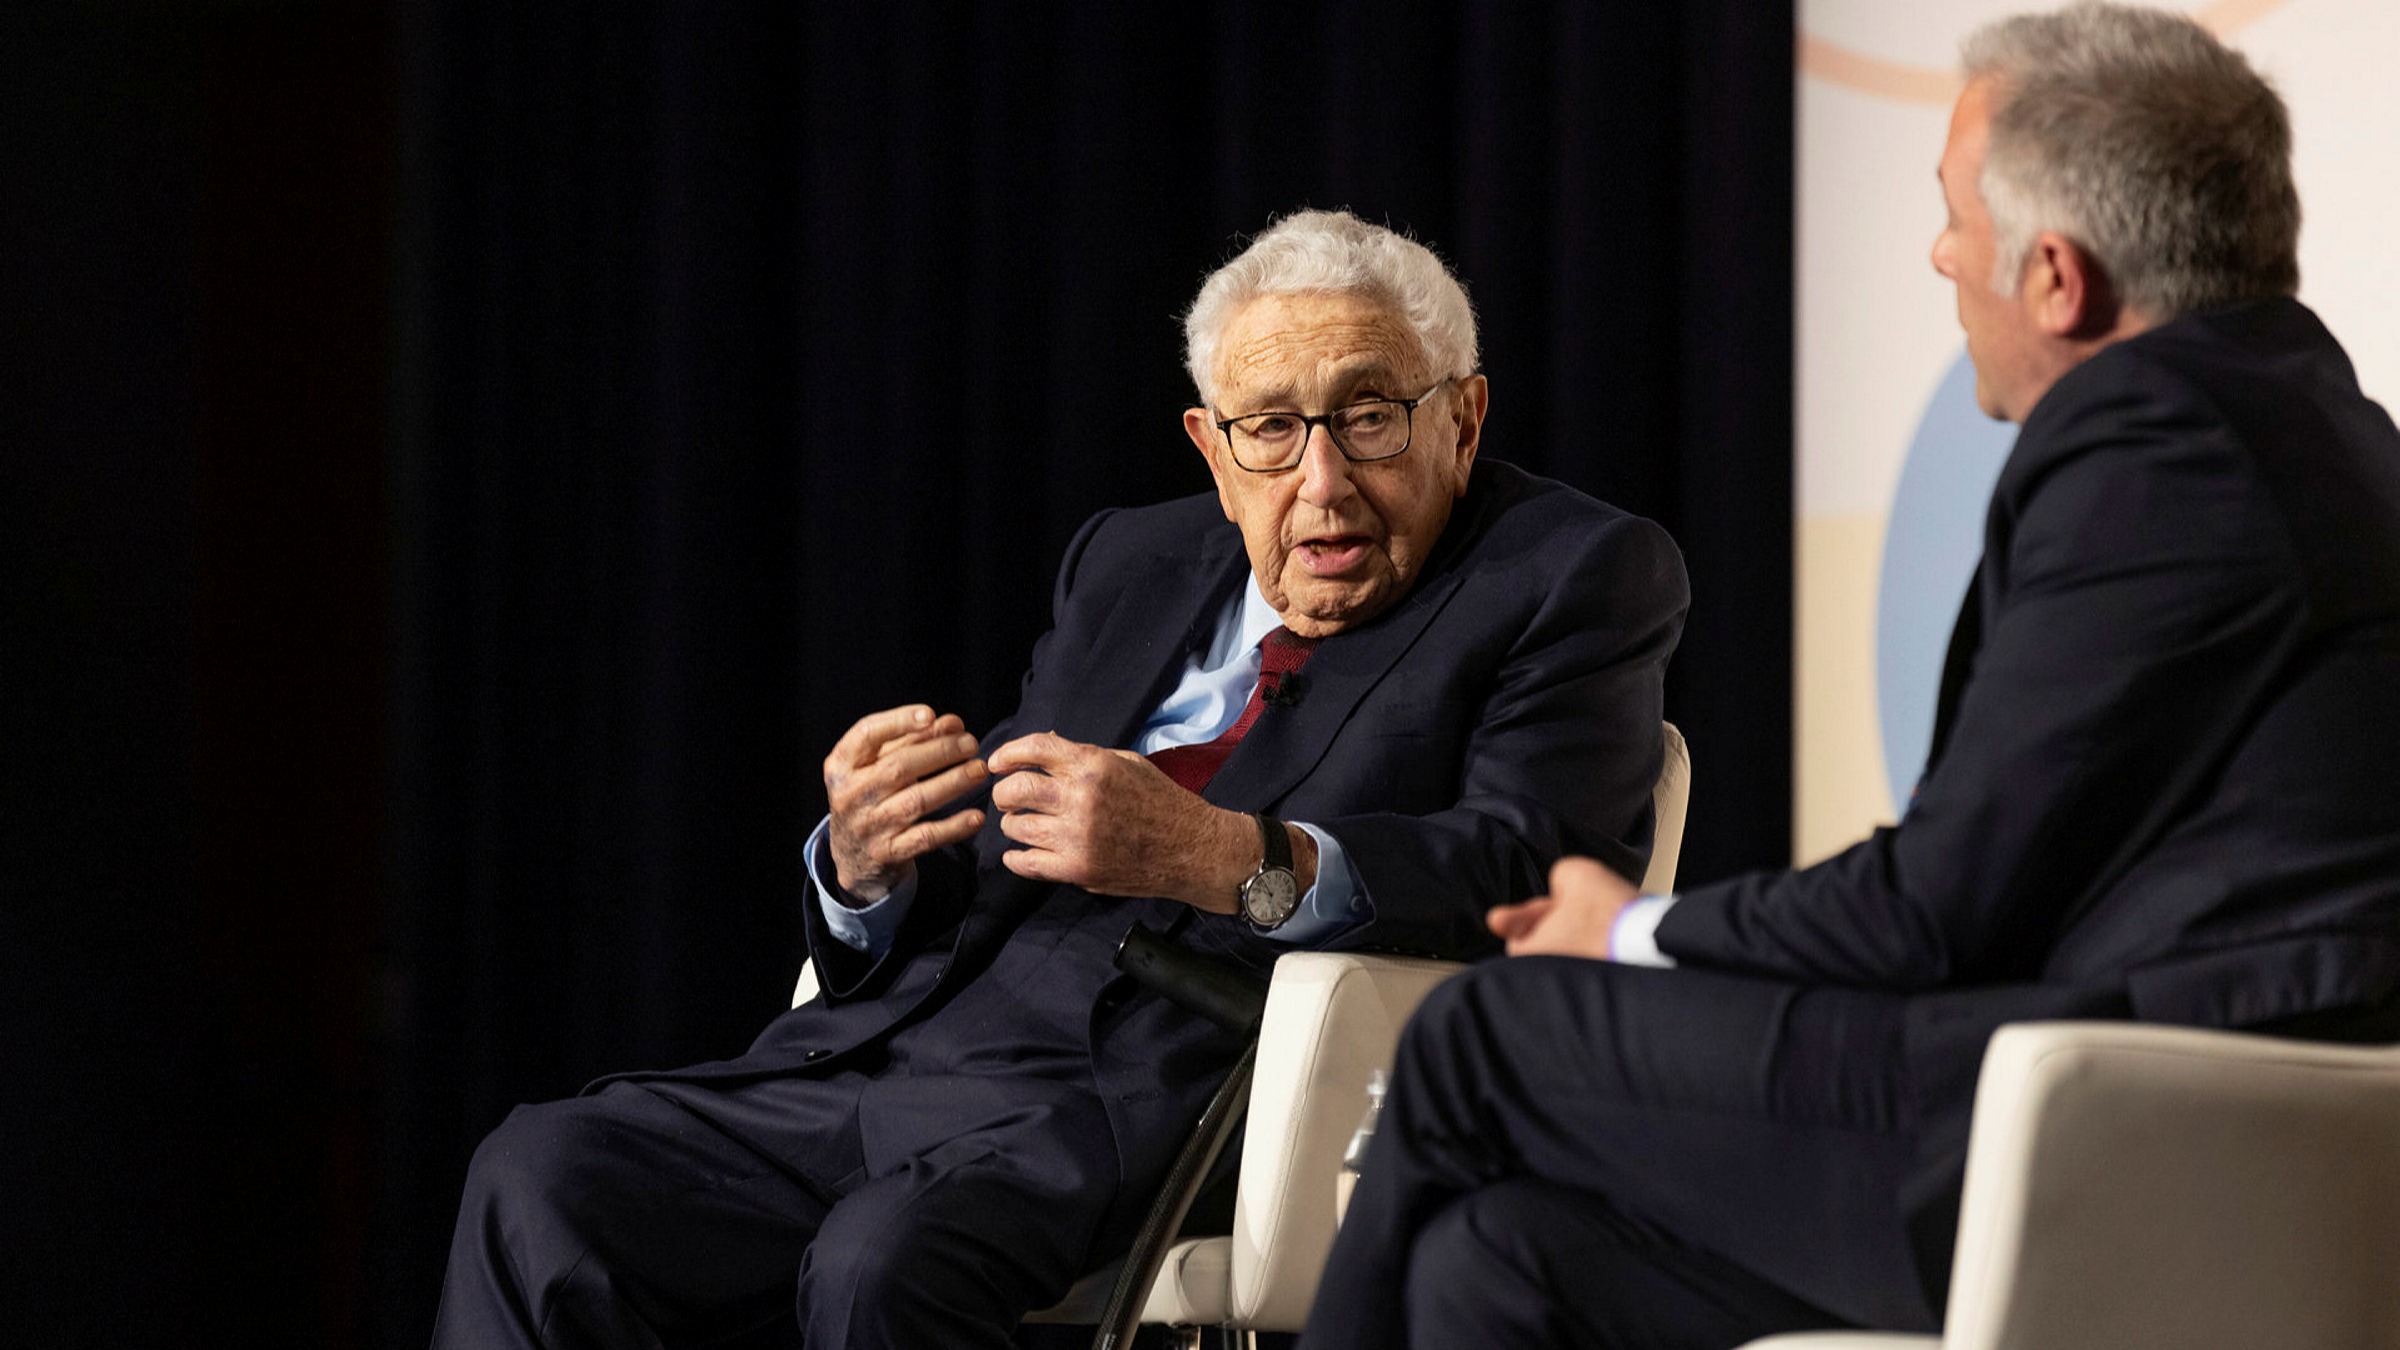 We are now living in a totally new era' — Henry Kissinger | Financial Times